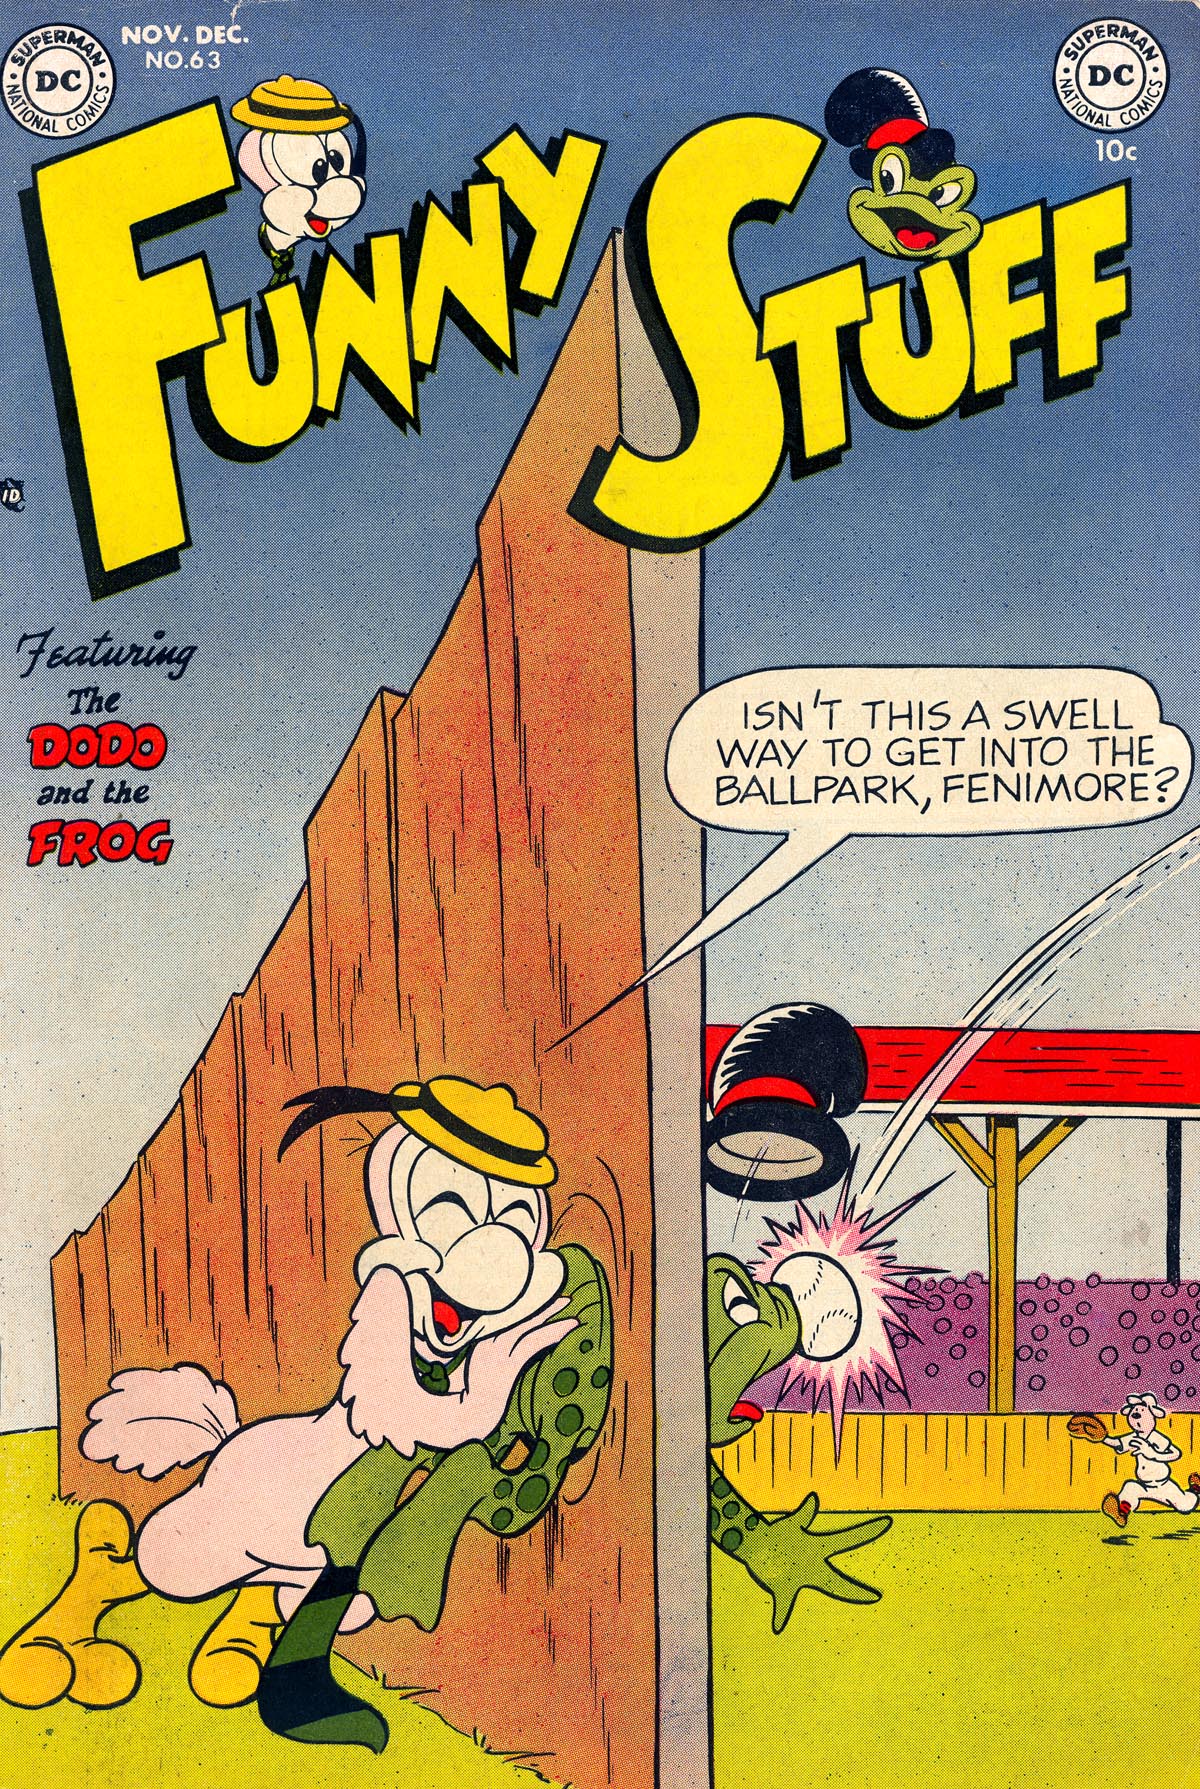 Read online Funny Stuff comic -  Issue #63 - 1